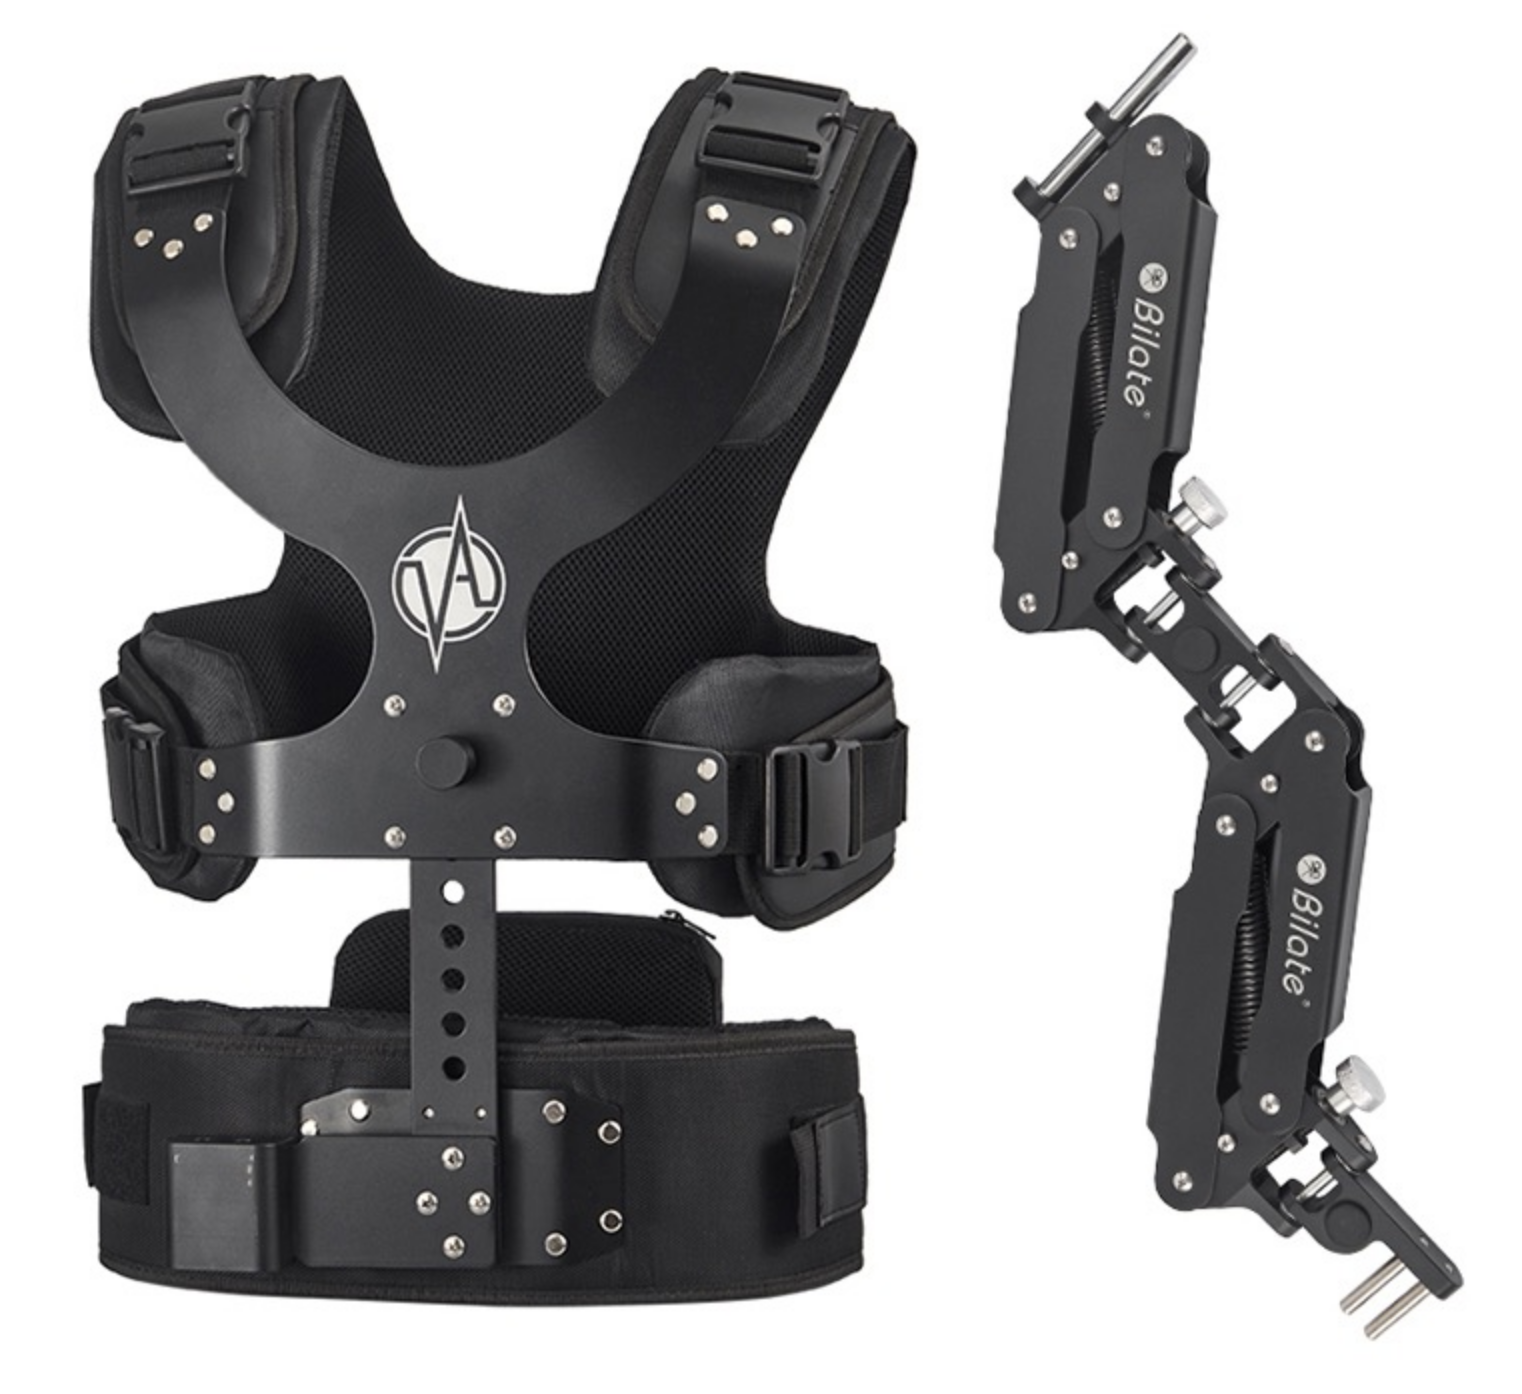 Steadicam Arm And Vest - for Use with Merlin Camera AVGPK B&H